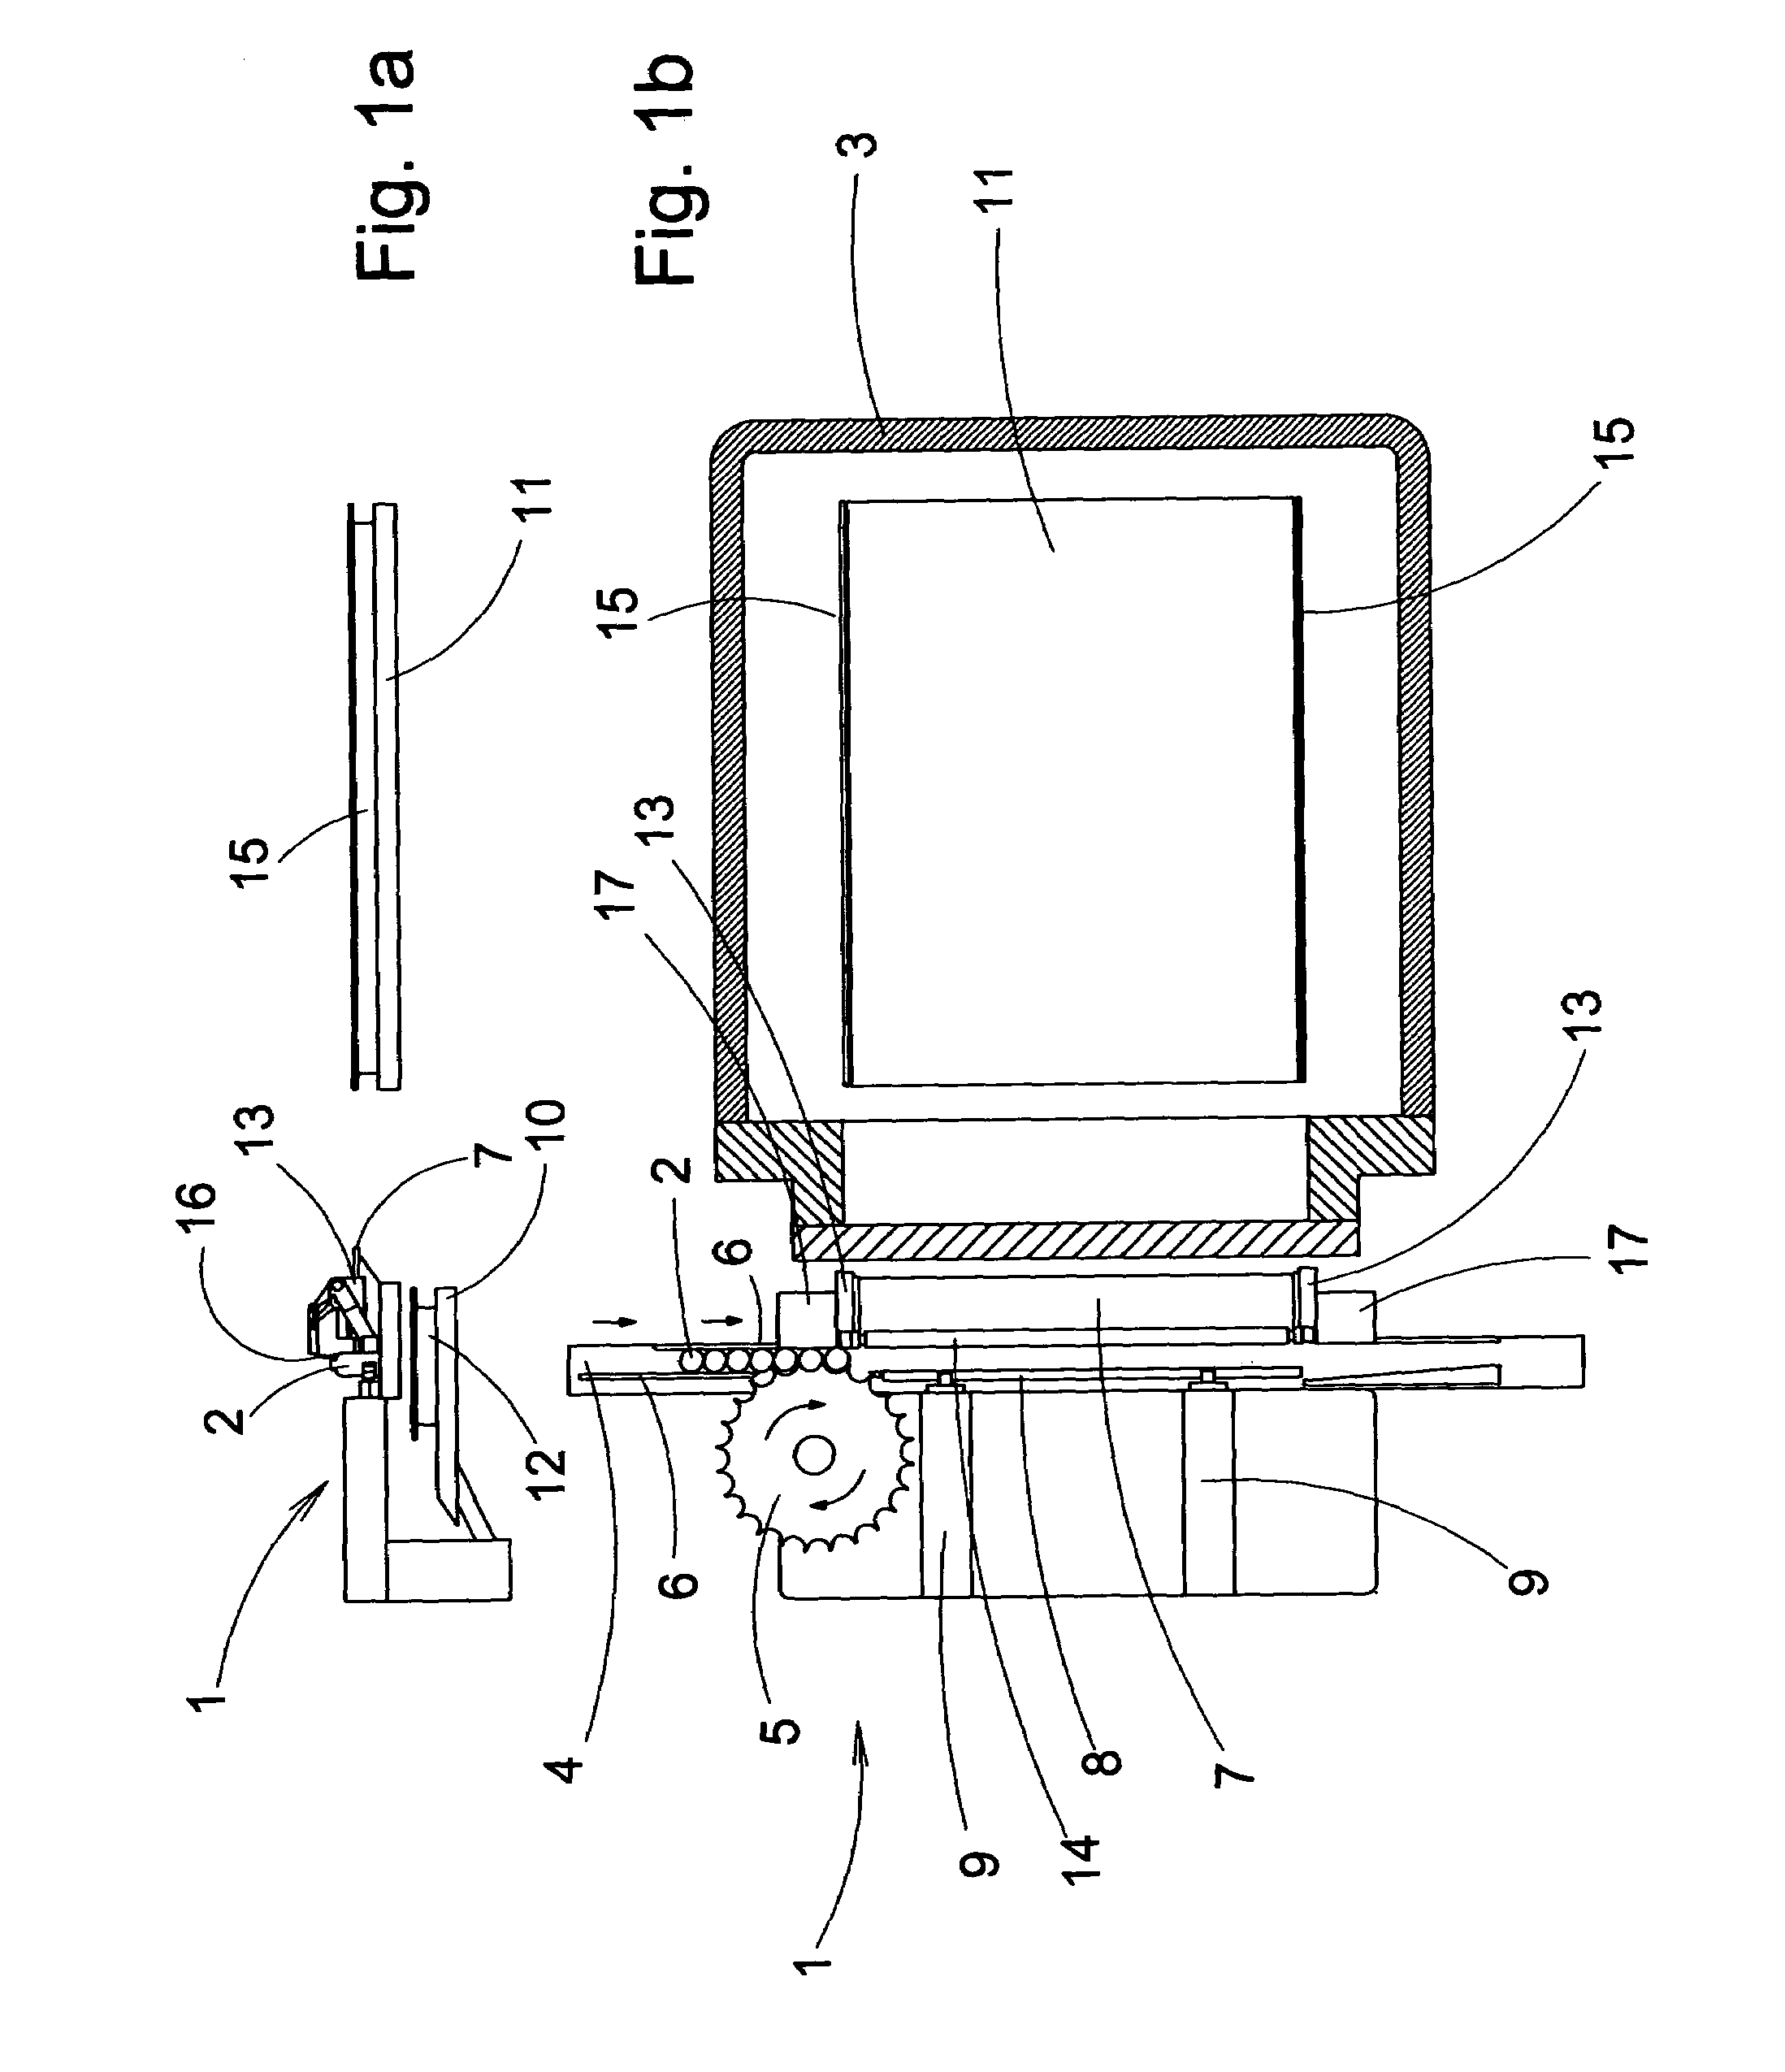 Device for loading and unloading containers